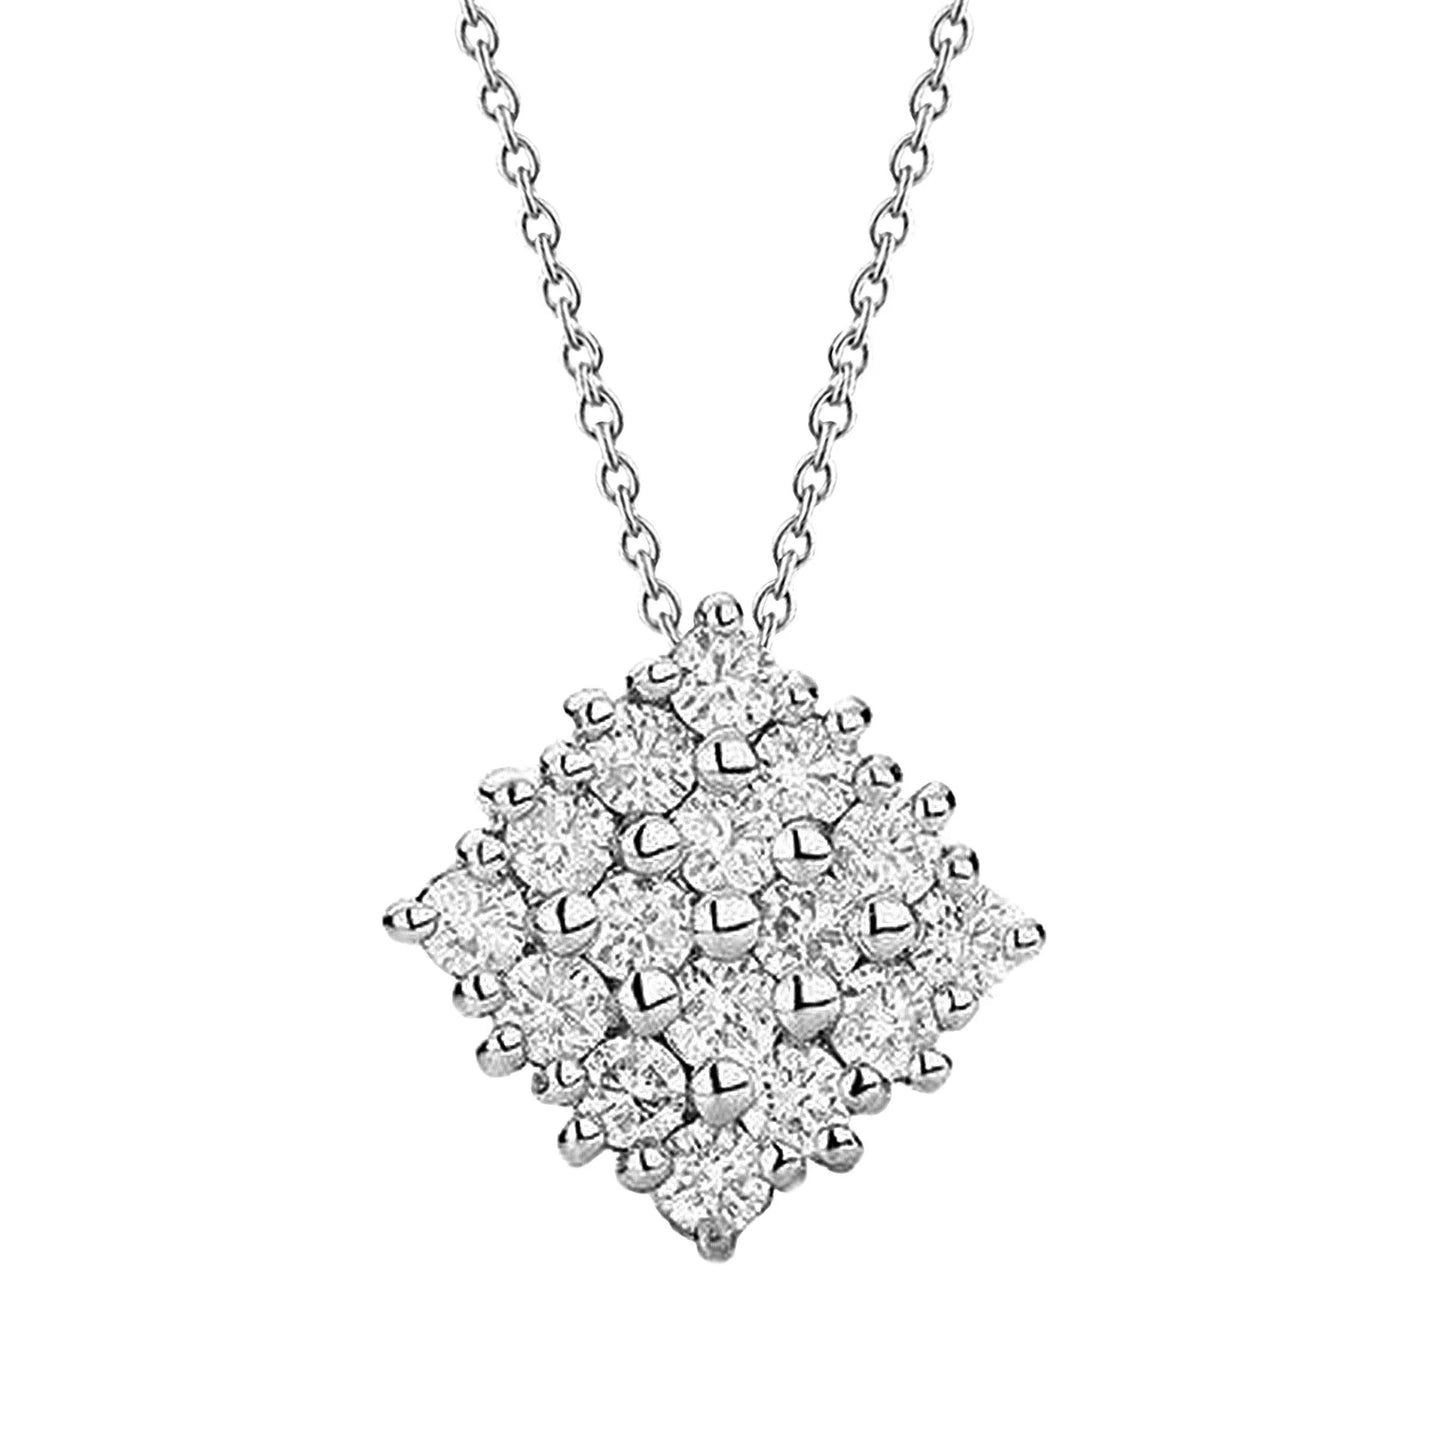 Round Cut Real Diamond Cluster Pendant Necklace 4 Carats White Gold 14K